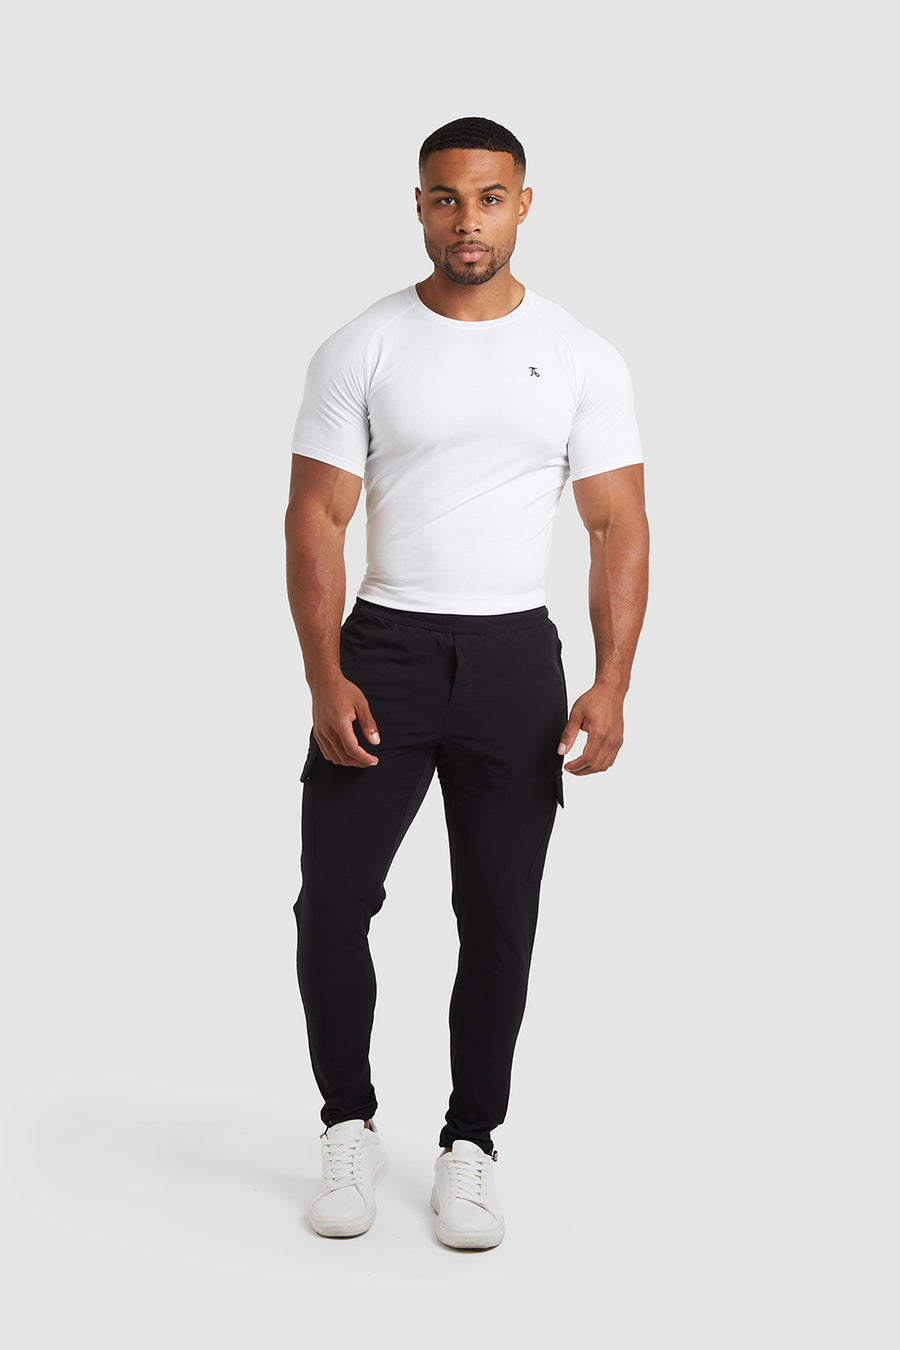 Tech Cargo Pants in Black - TAILORED ATHLETE - USA